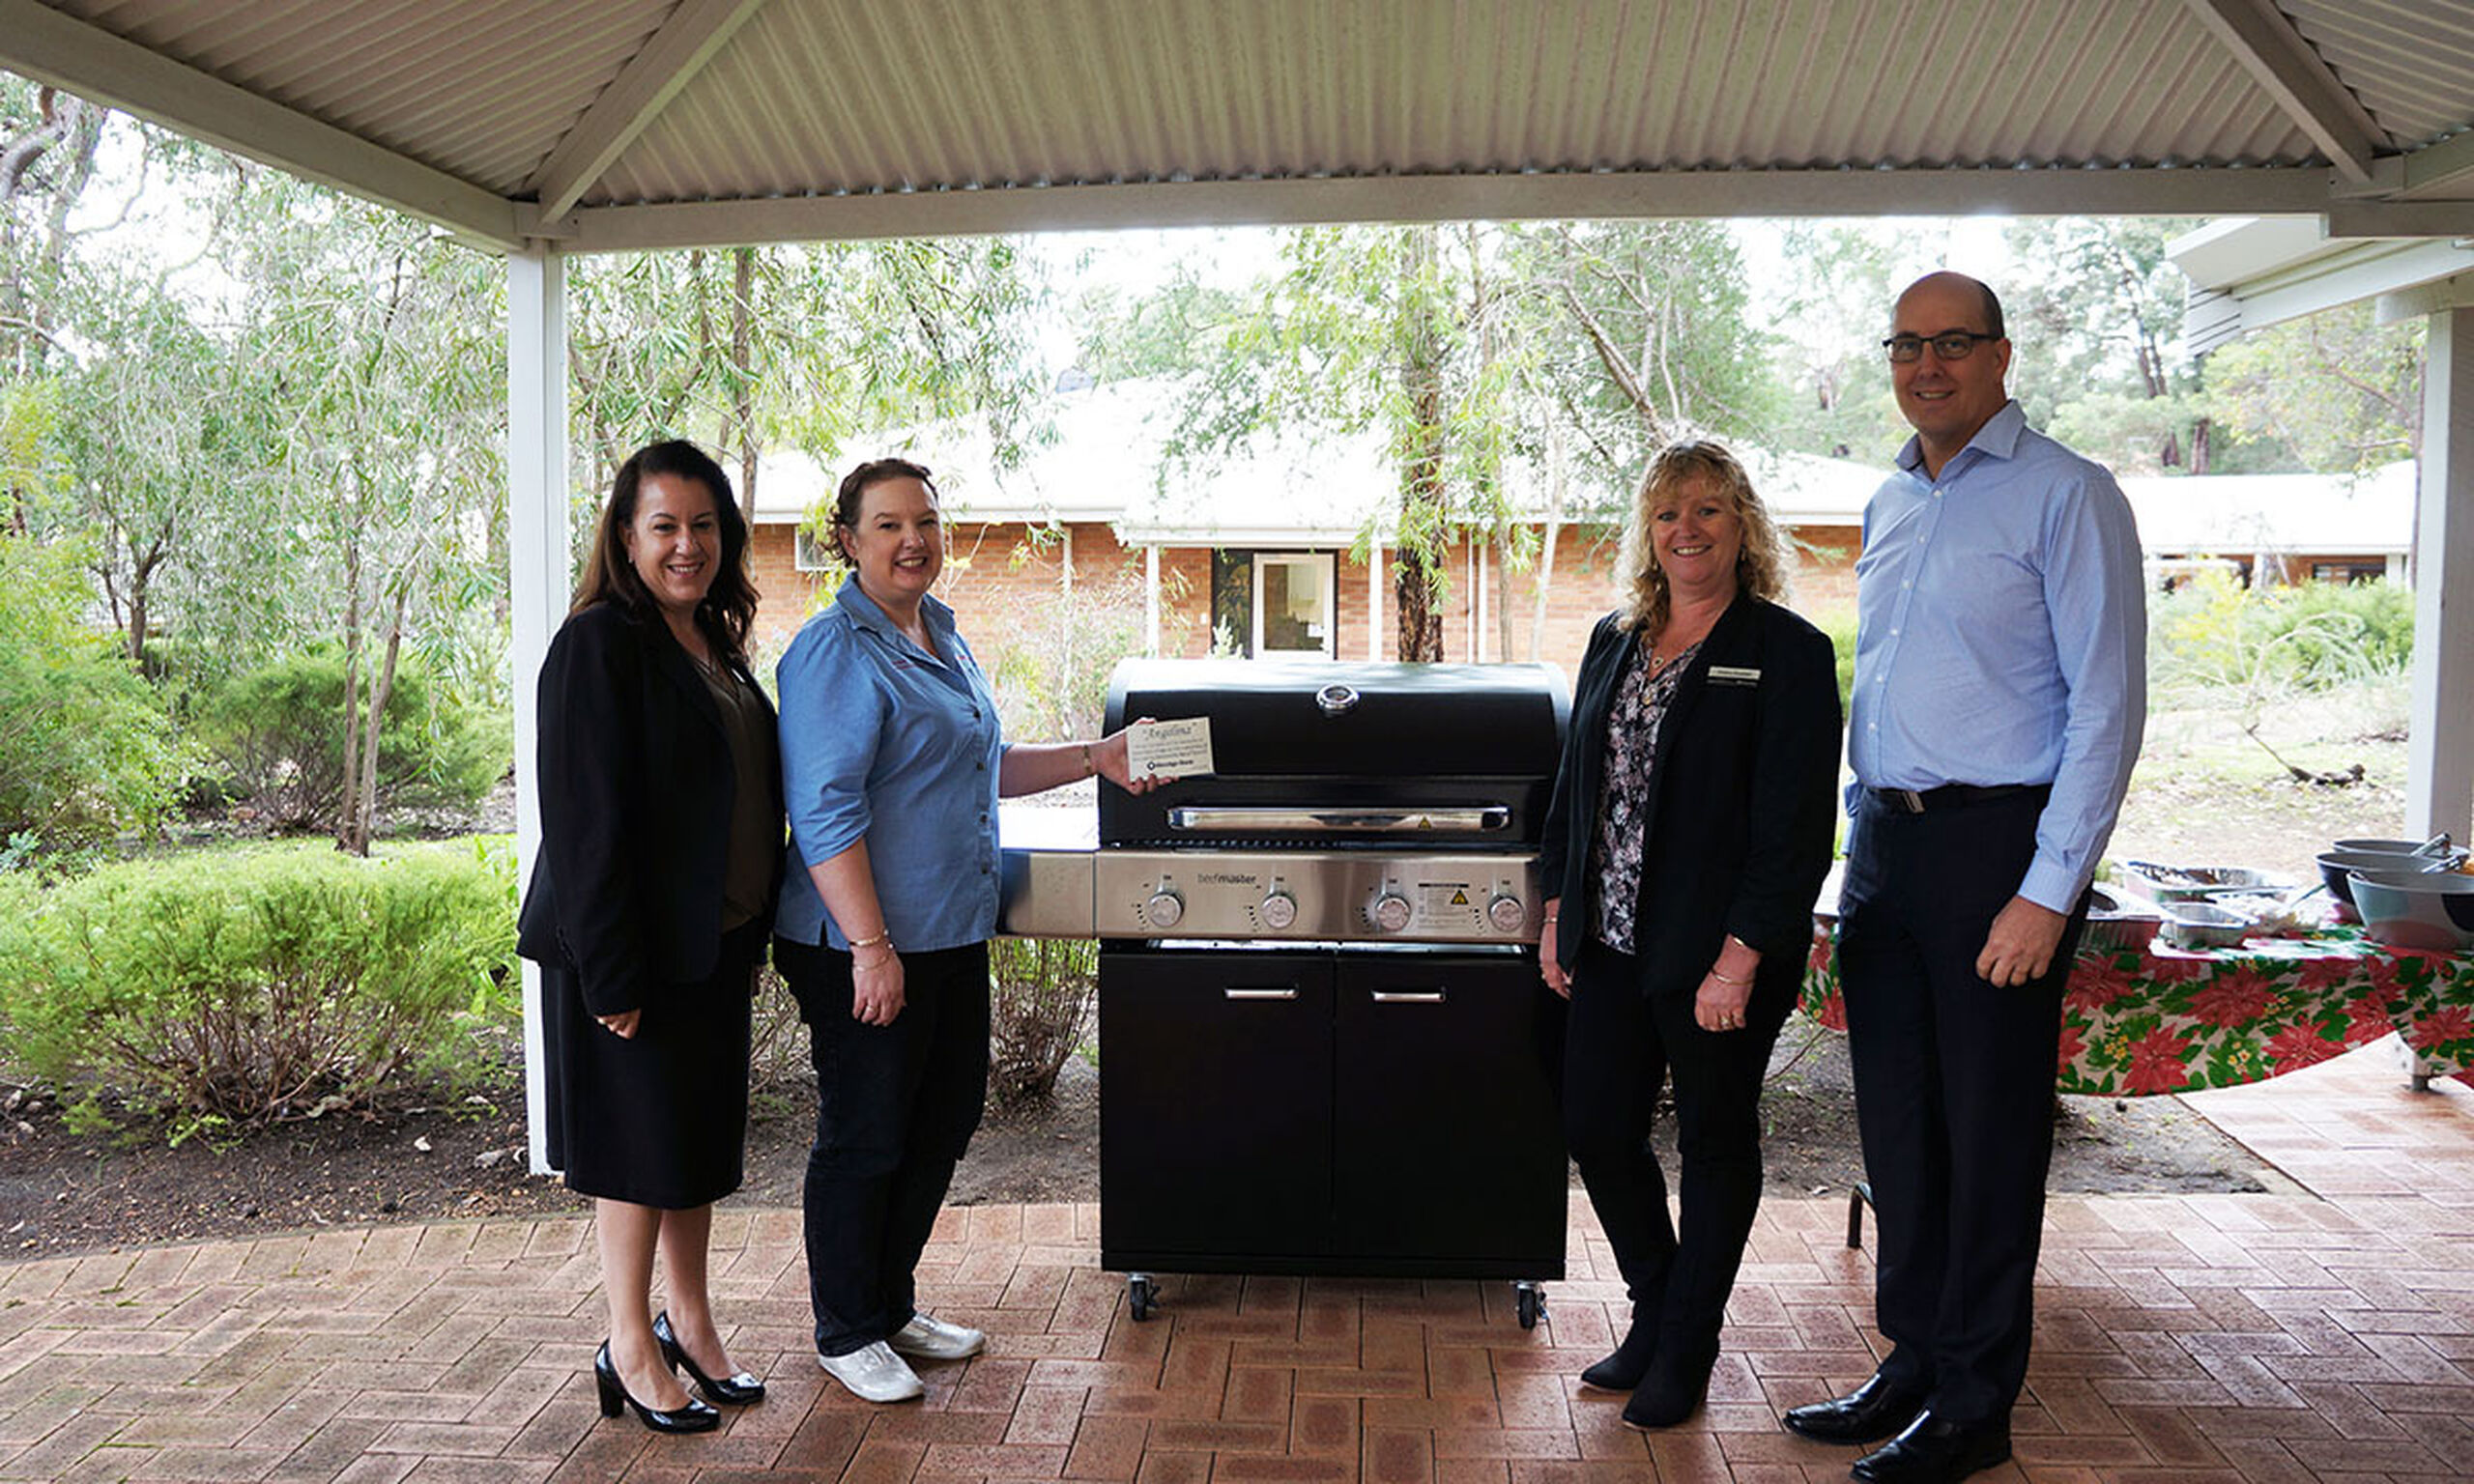 Nothing brings people together quite like a barbecue at Yallambee Retirement Village